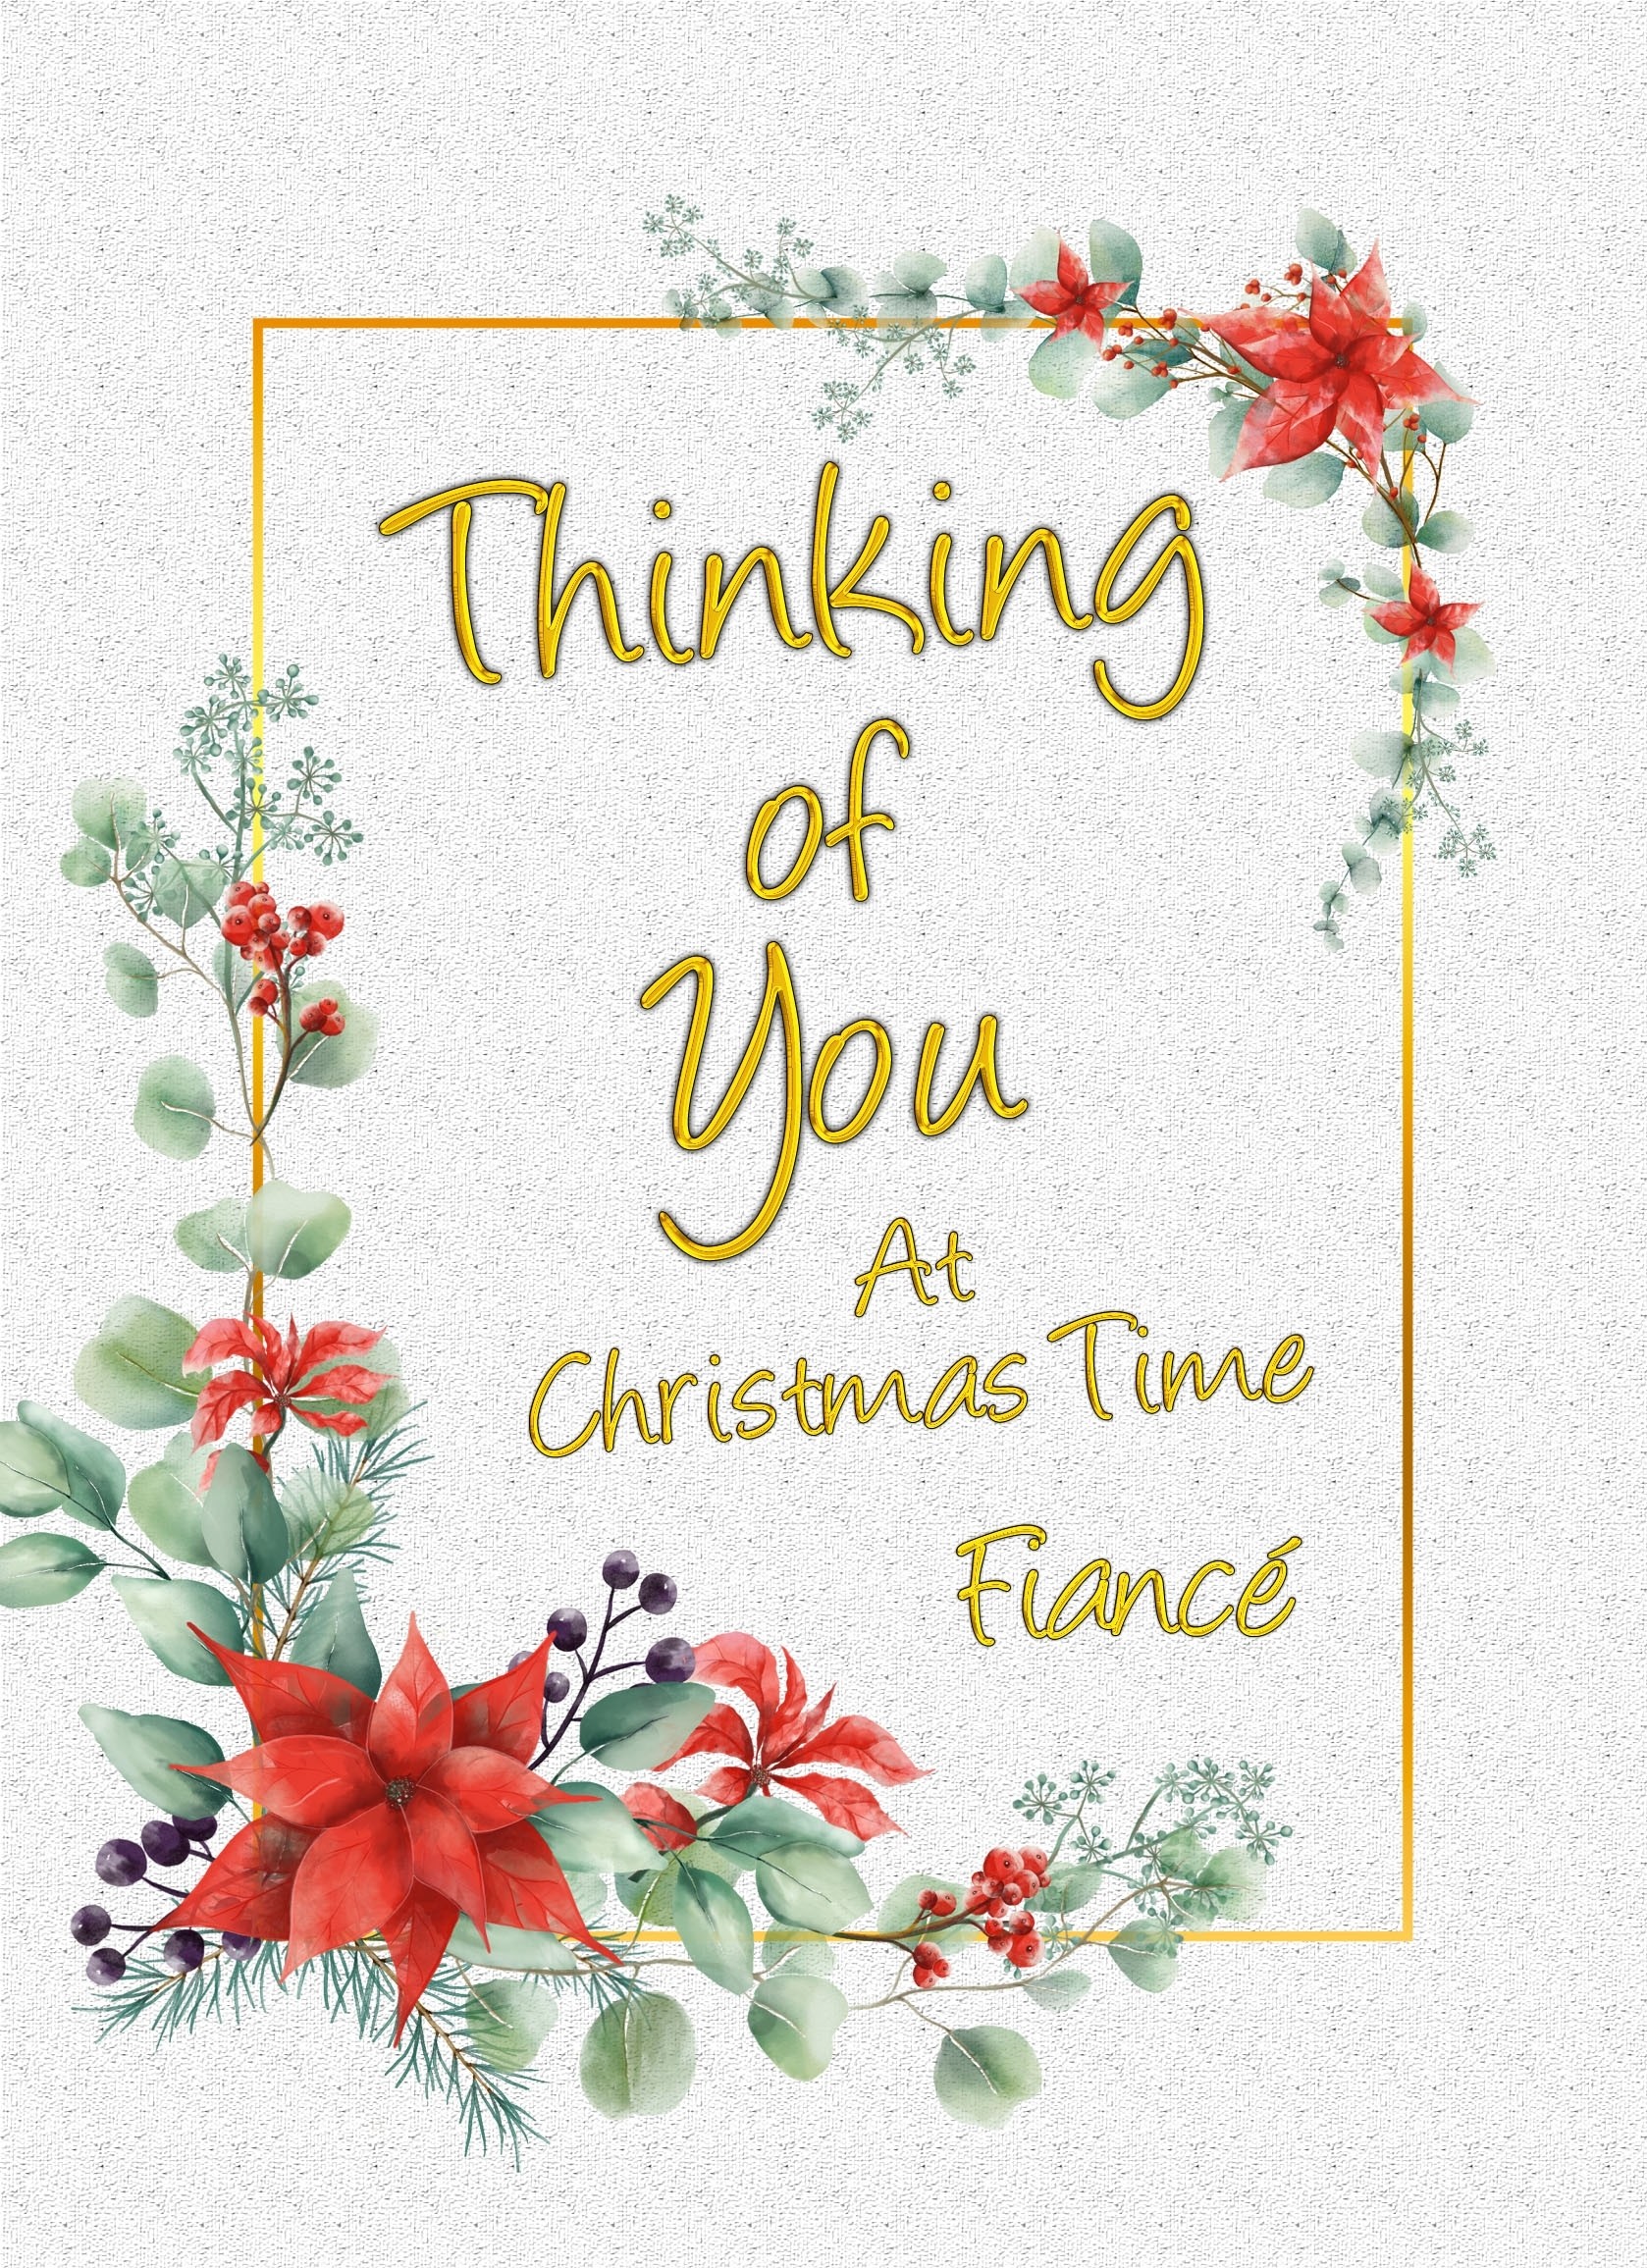 Thinking of You at Christmas Card For Fiance